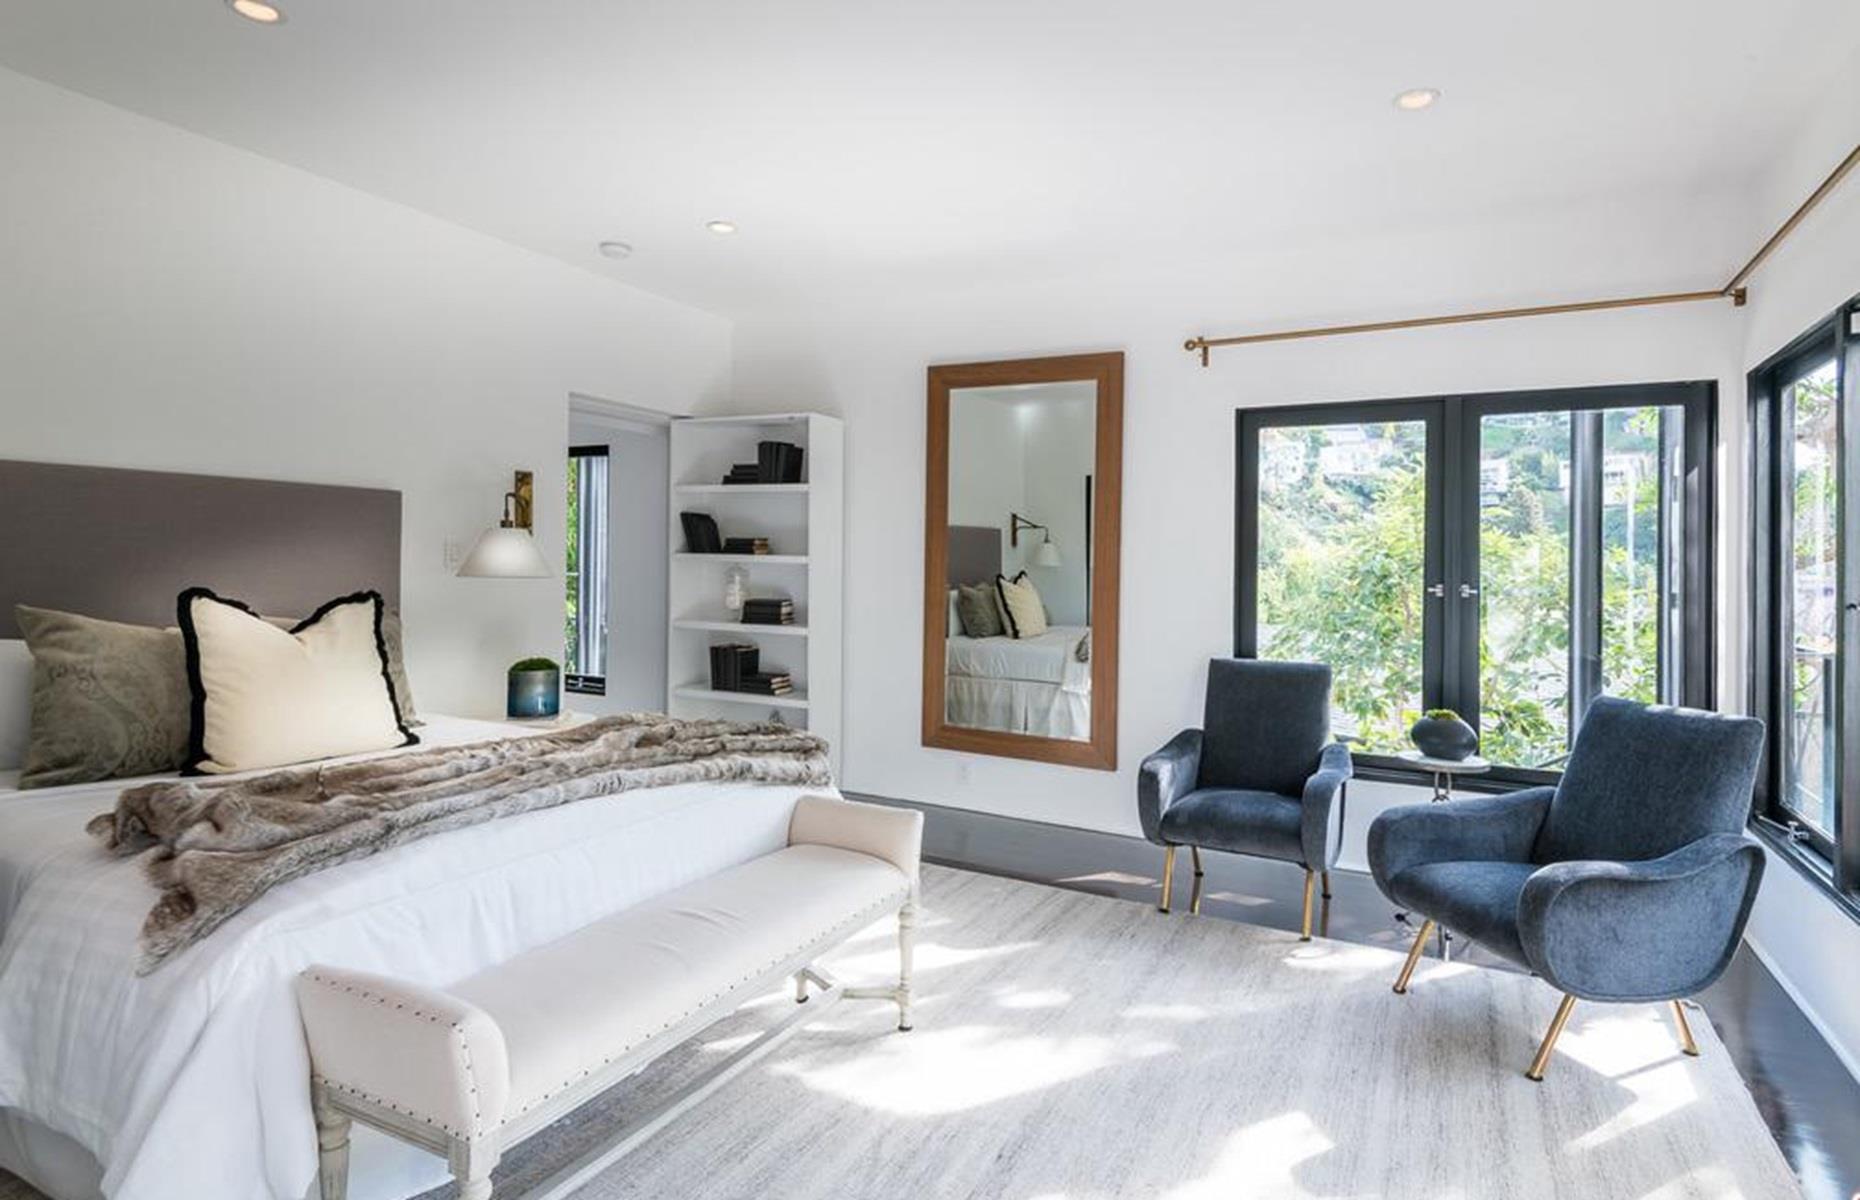 <p>According to <a href="https://www.redfin.com/CA/Los-Angeles/8850-Evanview-Dr-90069/home/7119967">the listing</a>, the calming bedroom was Garland's personal suite. The perfect place for a Hollywood icon to escape the paparazzi, relax, and unwind, the room benefits from a sitting area, a luxury private bathroom, and a set of French doors, which open onto a tranquil courtyard garden where Garland no doubt spent plenty of downtime.</p>